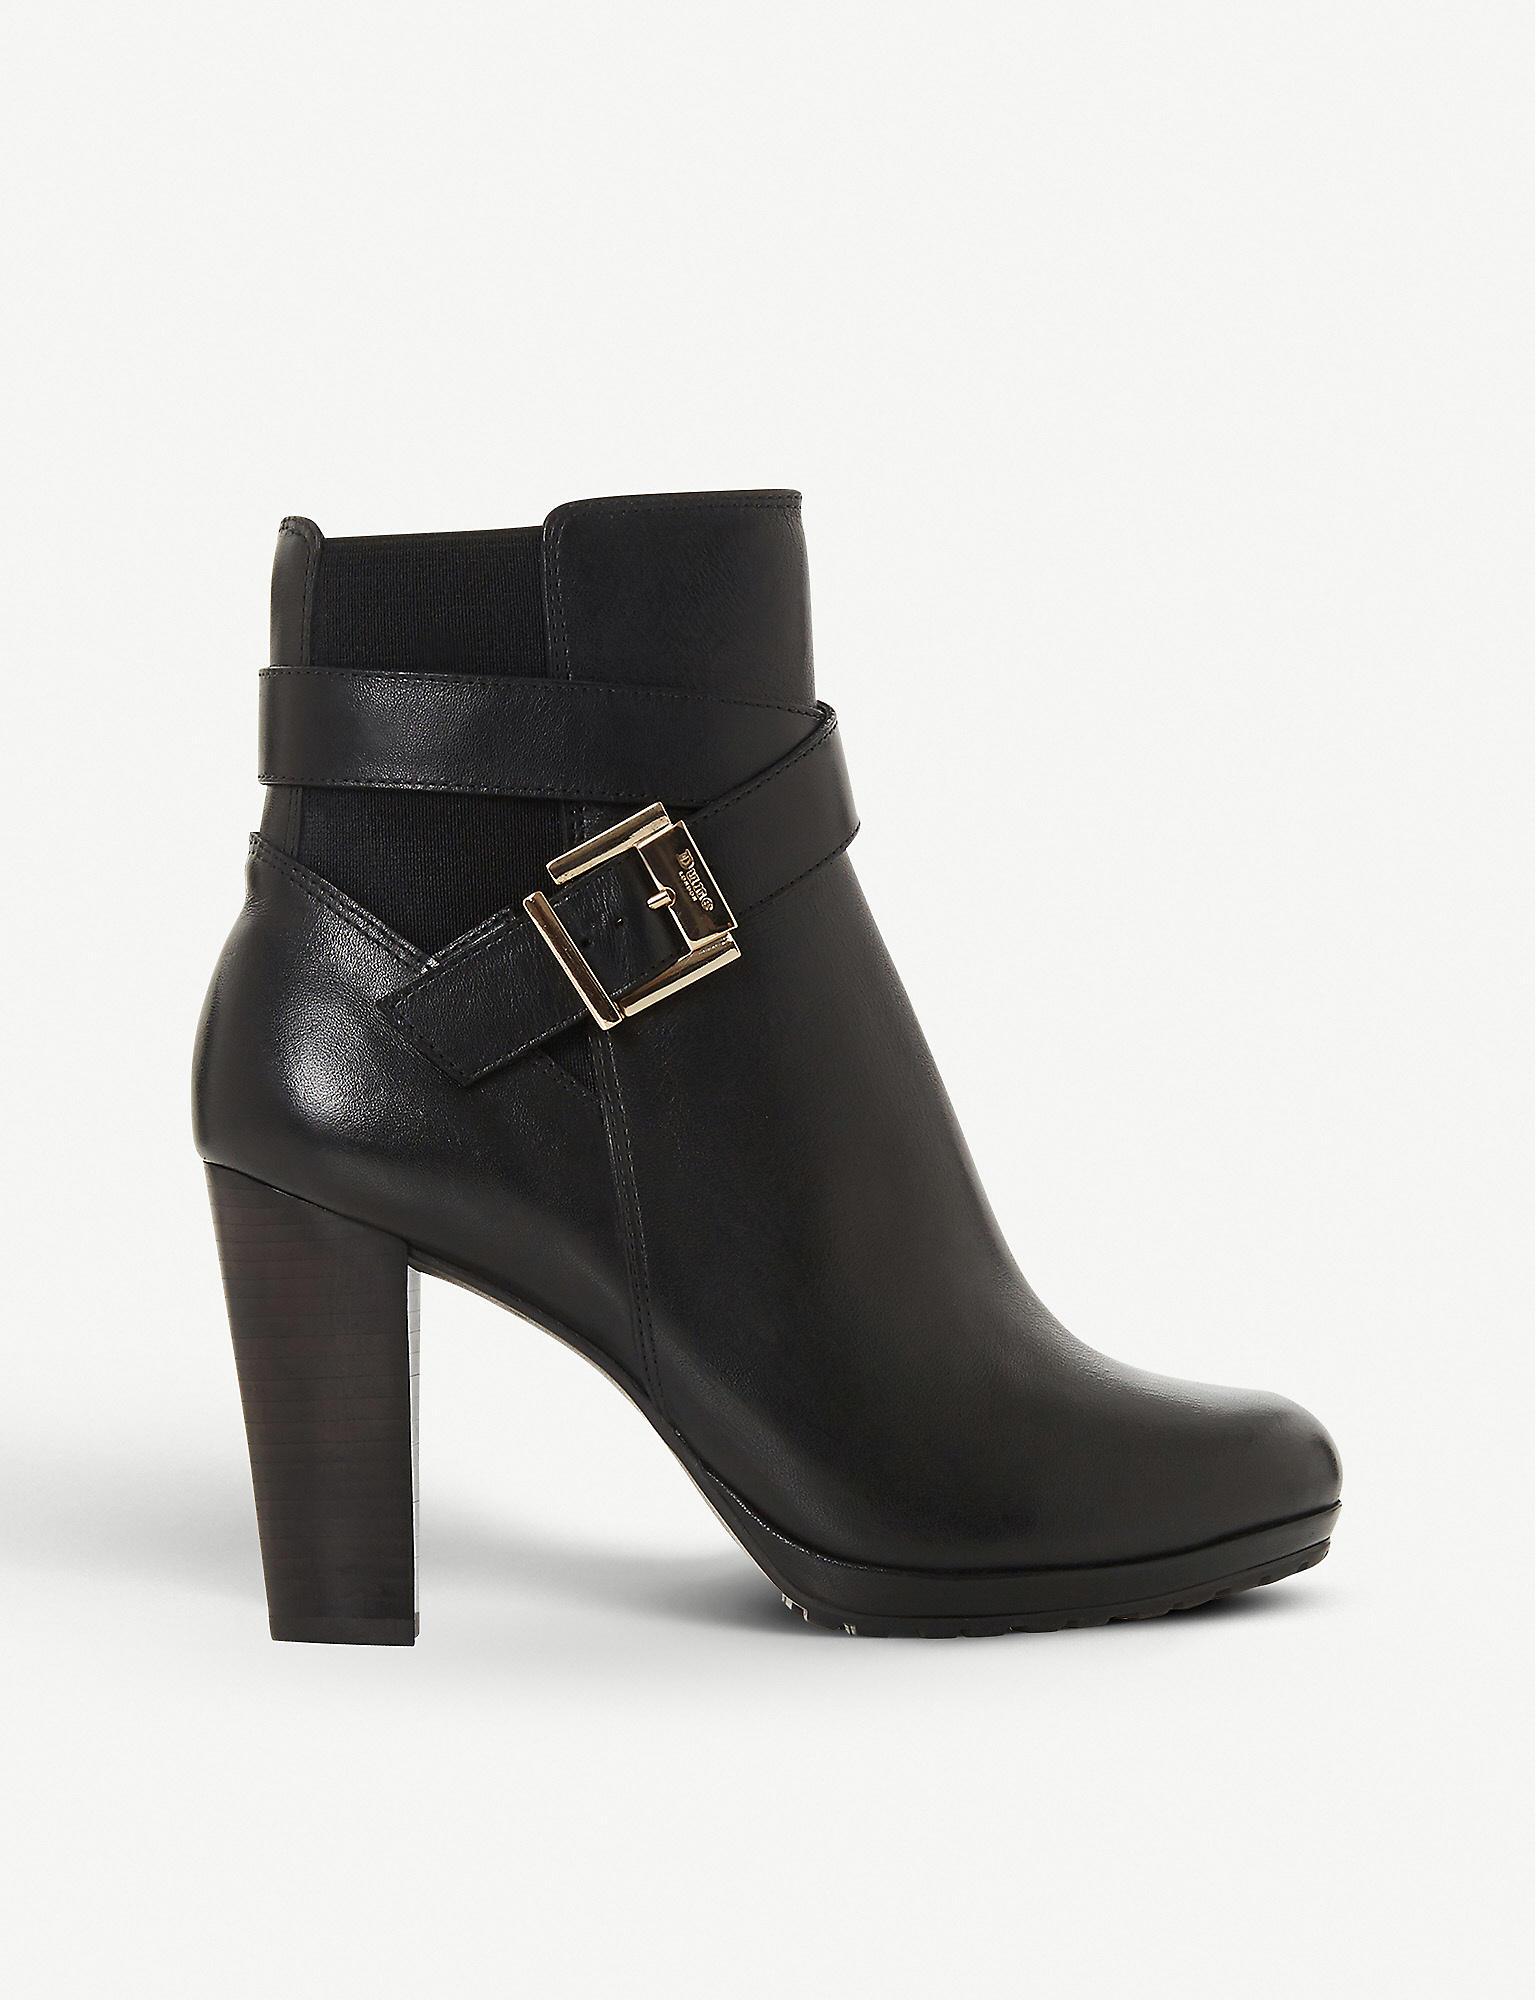 Dune Orrion Leather Ankle Boots in 